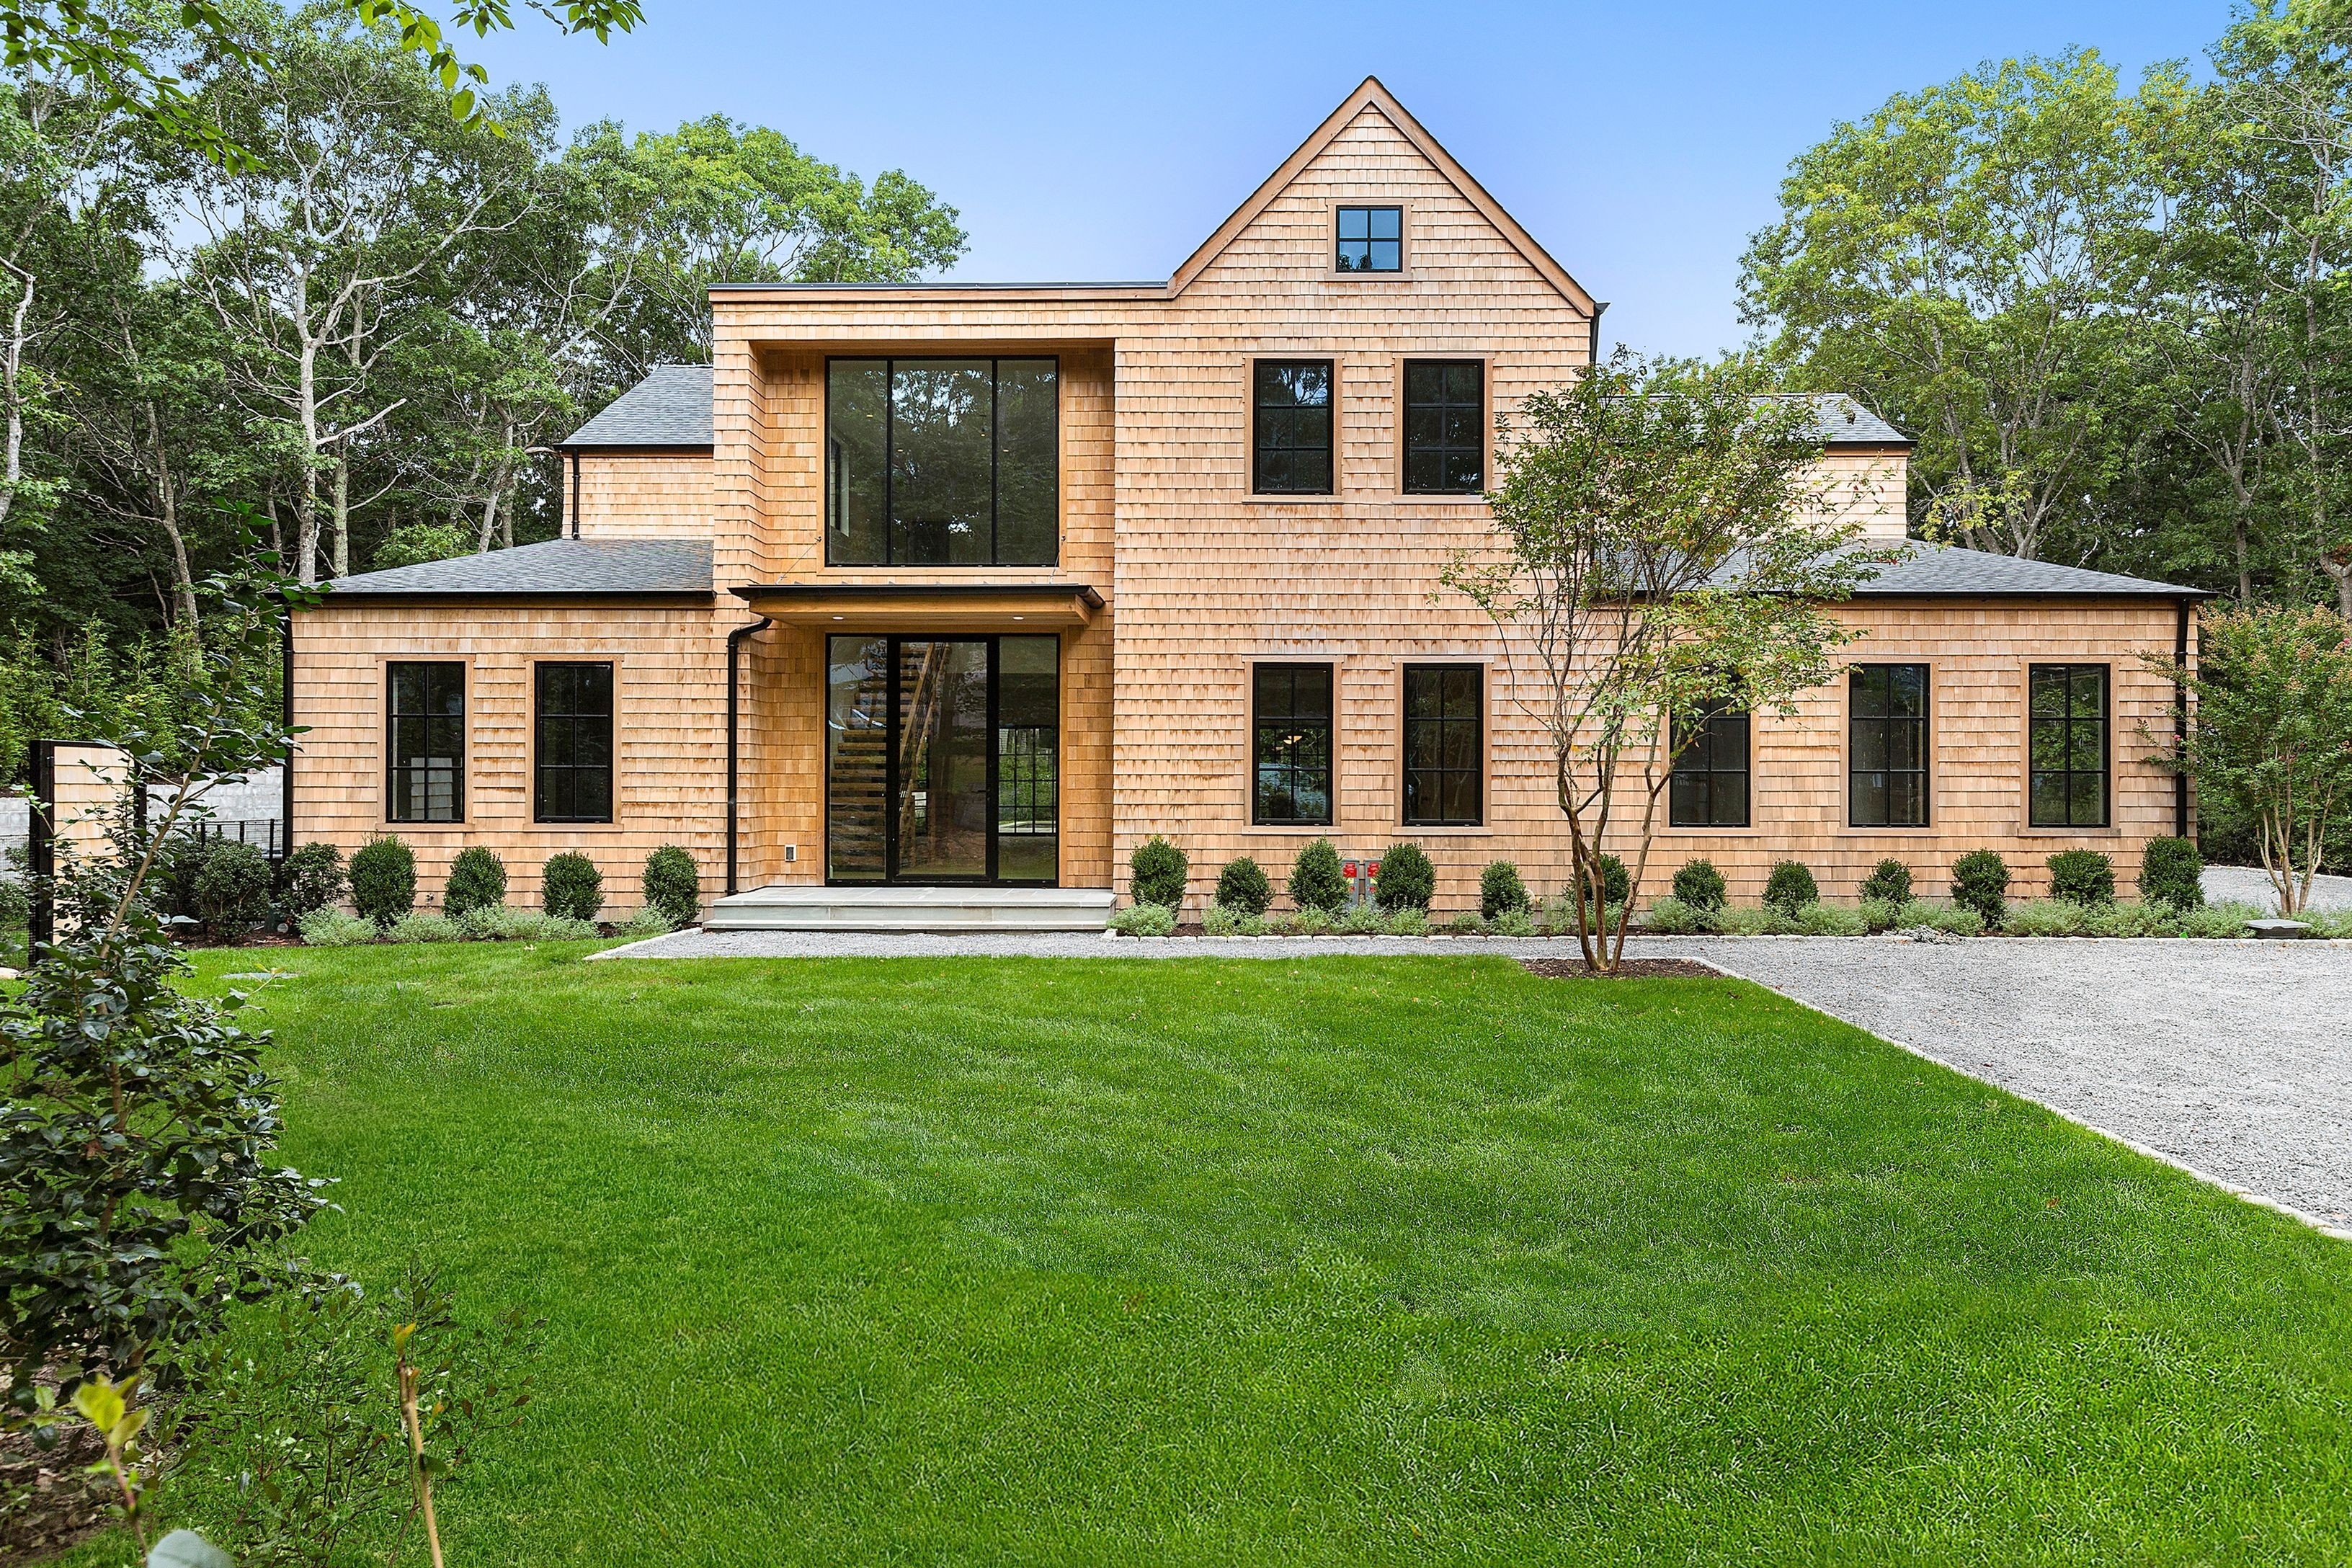 Single Family Home for Sale at Northwest Woods, East Hampton, New York 11937